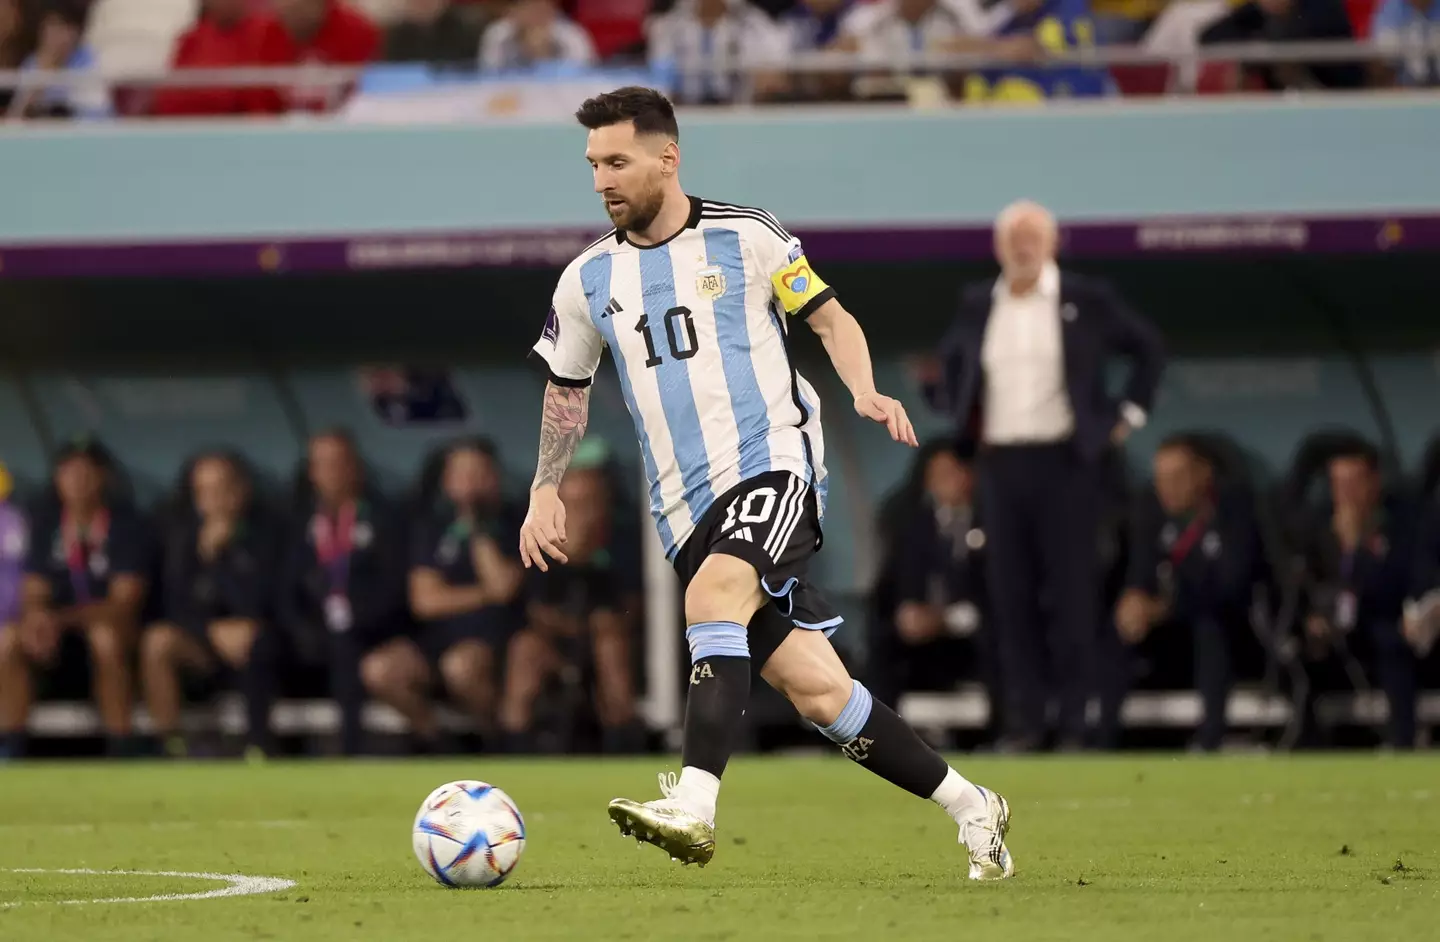 Lionel Messi has scored three times for Argentina at the World Cup in Qatar.